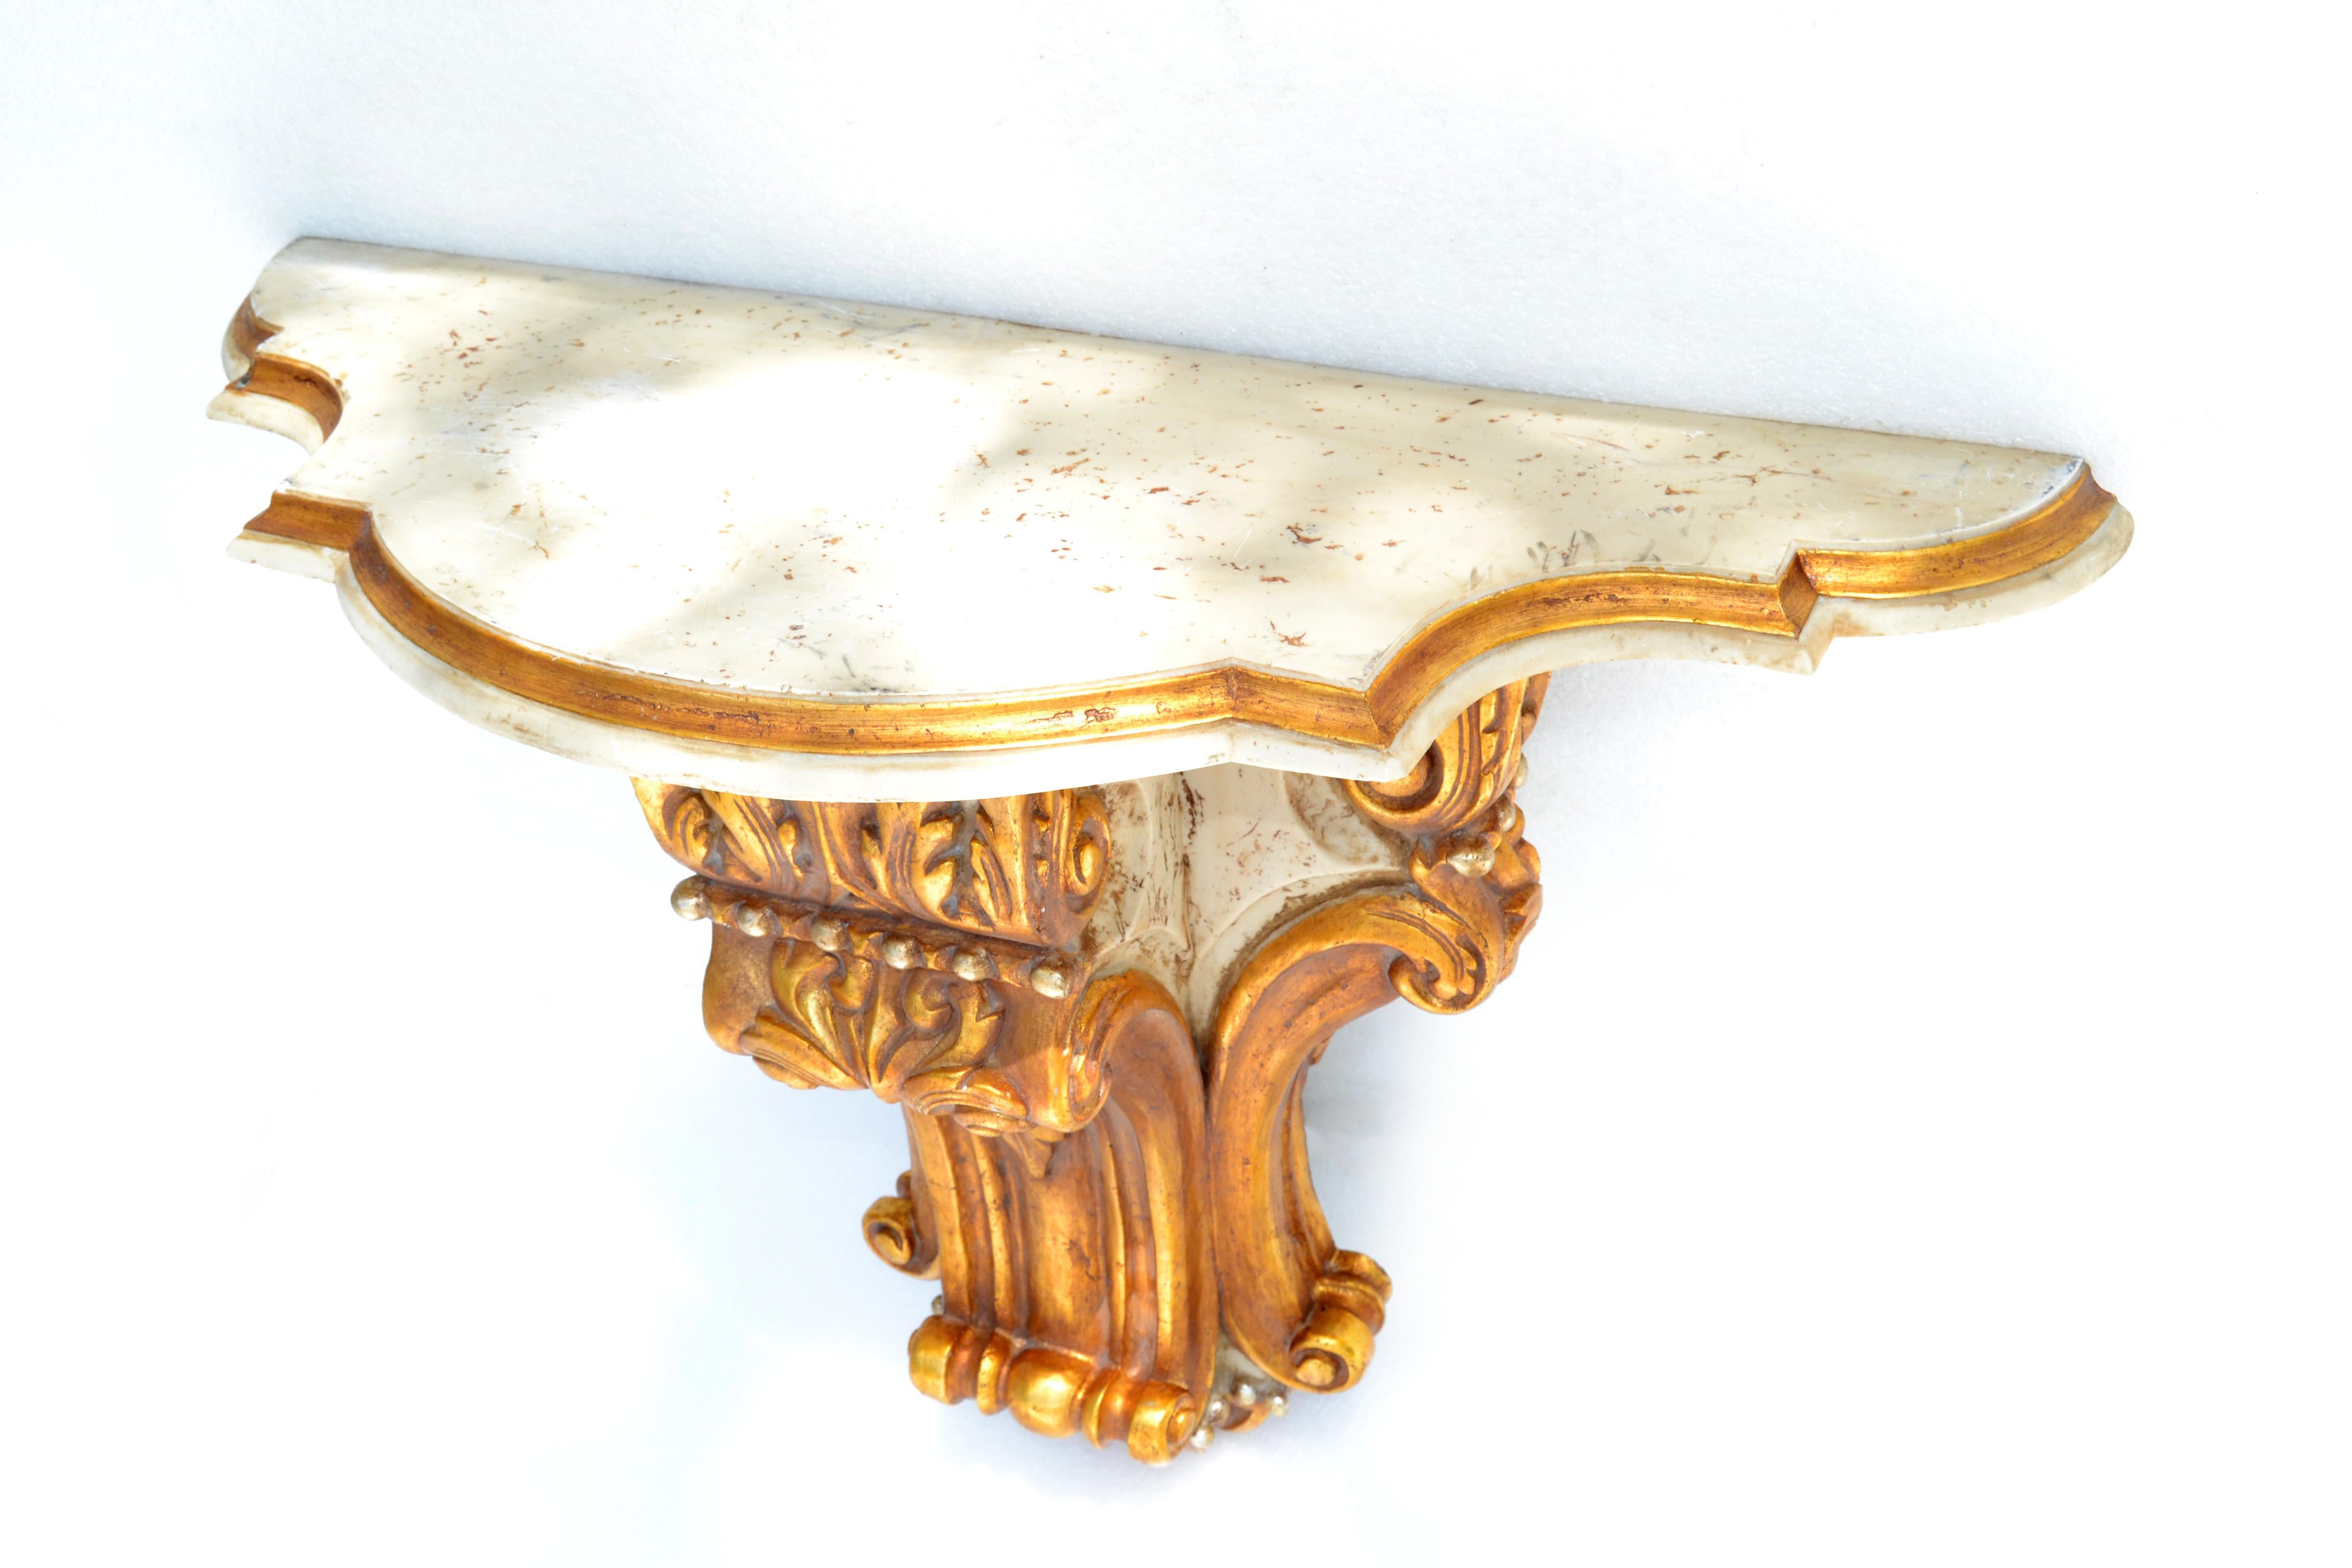 Hand-Carved Signed Neoclassical Wall-Mounted Carved Gilt Wood & Marble Console Table, Spain For Sale